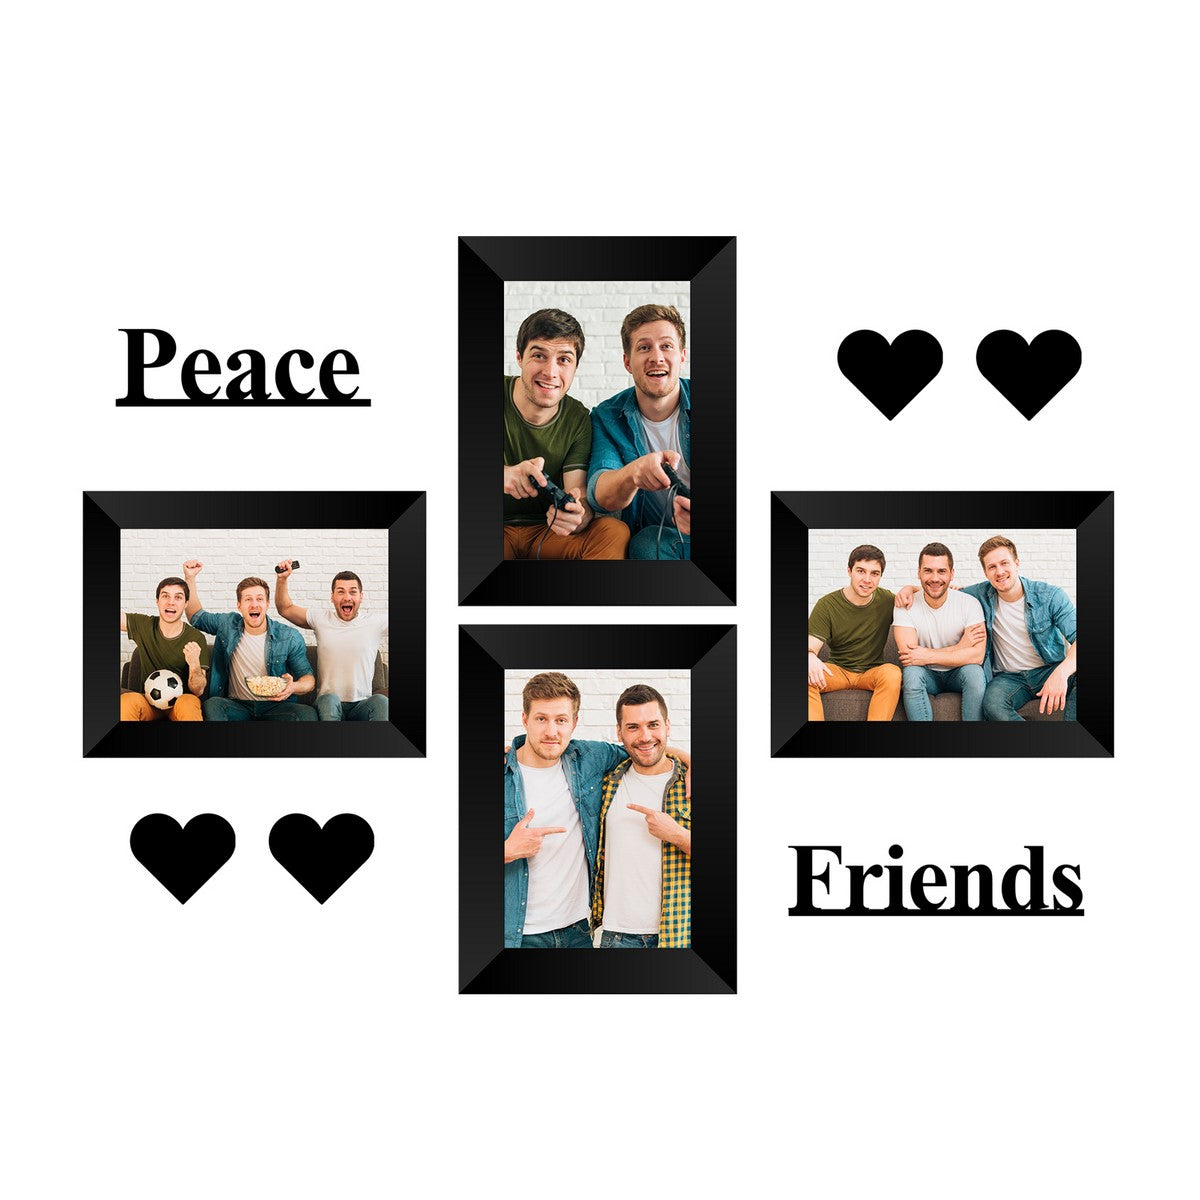 Memory Wall Collage Photo Frame - Set of 4 Photo Frames for 4 Photos of 5"x7", 1 Piece of PEACE, 1 Piece of FRIENDS, 4 Pieces of HEARTS